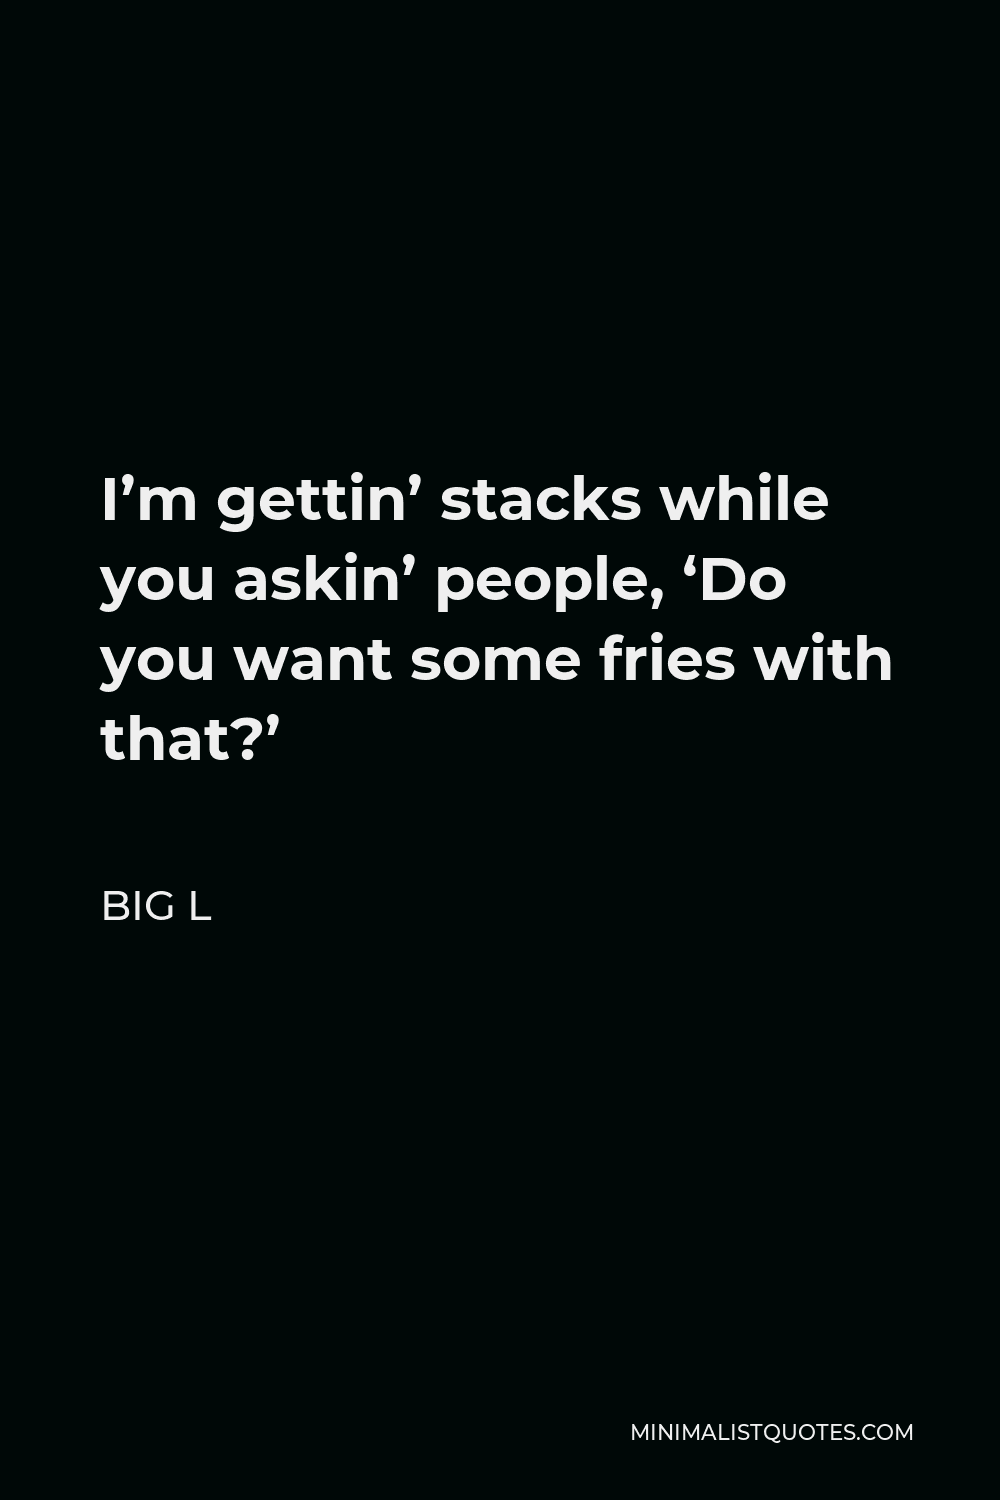 Big L Quote - I’m gettin’ stacks while you askin’ people, ‘Do you want some fries with that?’